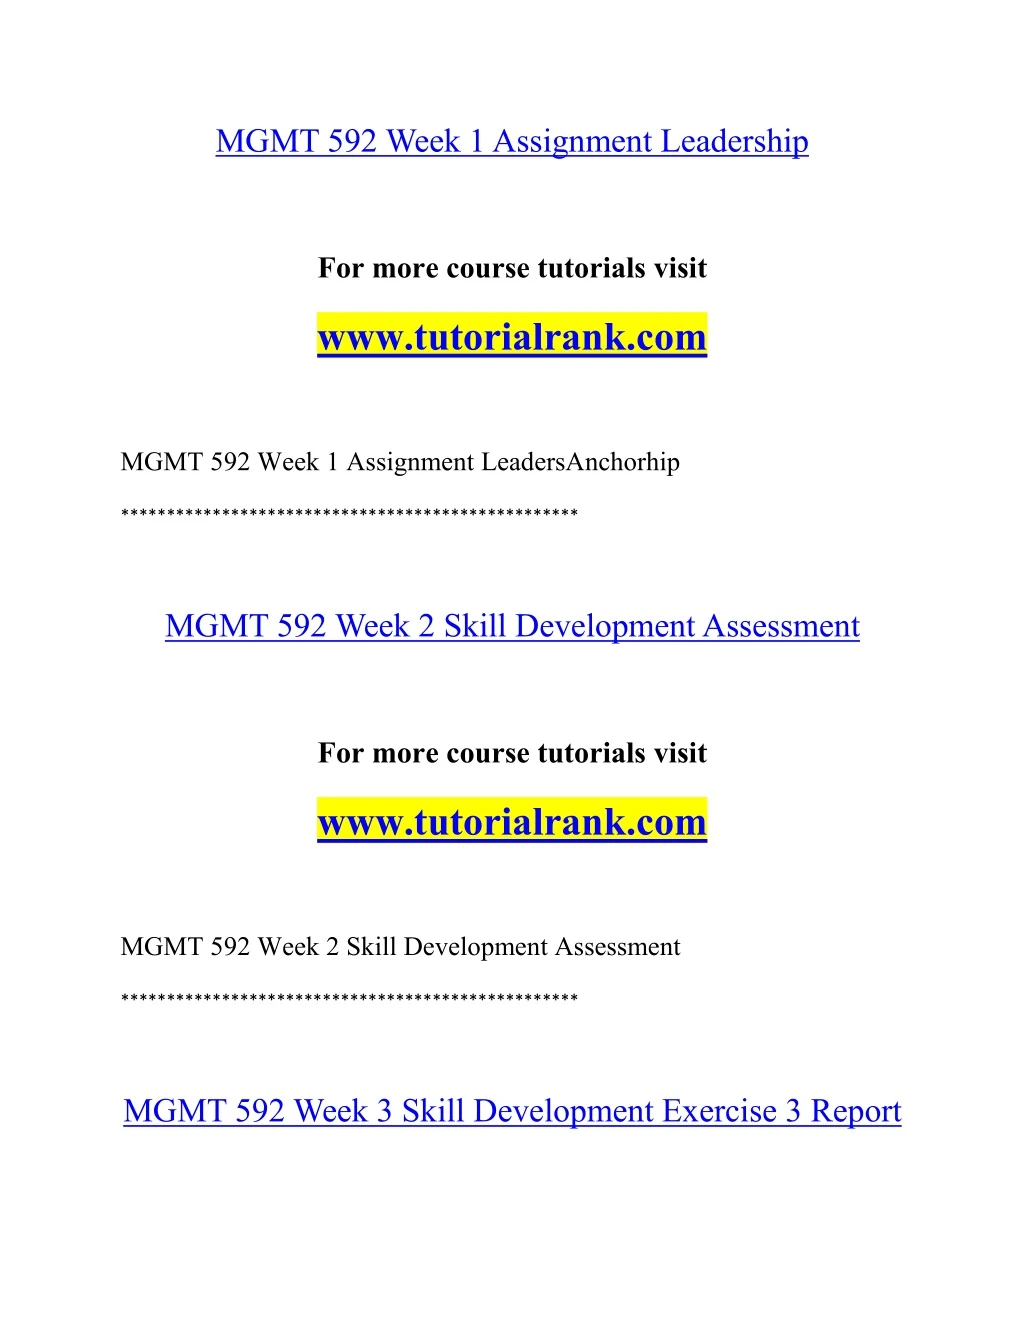 mgmt 592 week 1assignment leadership